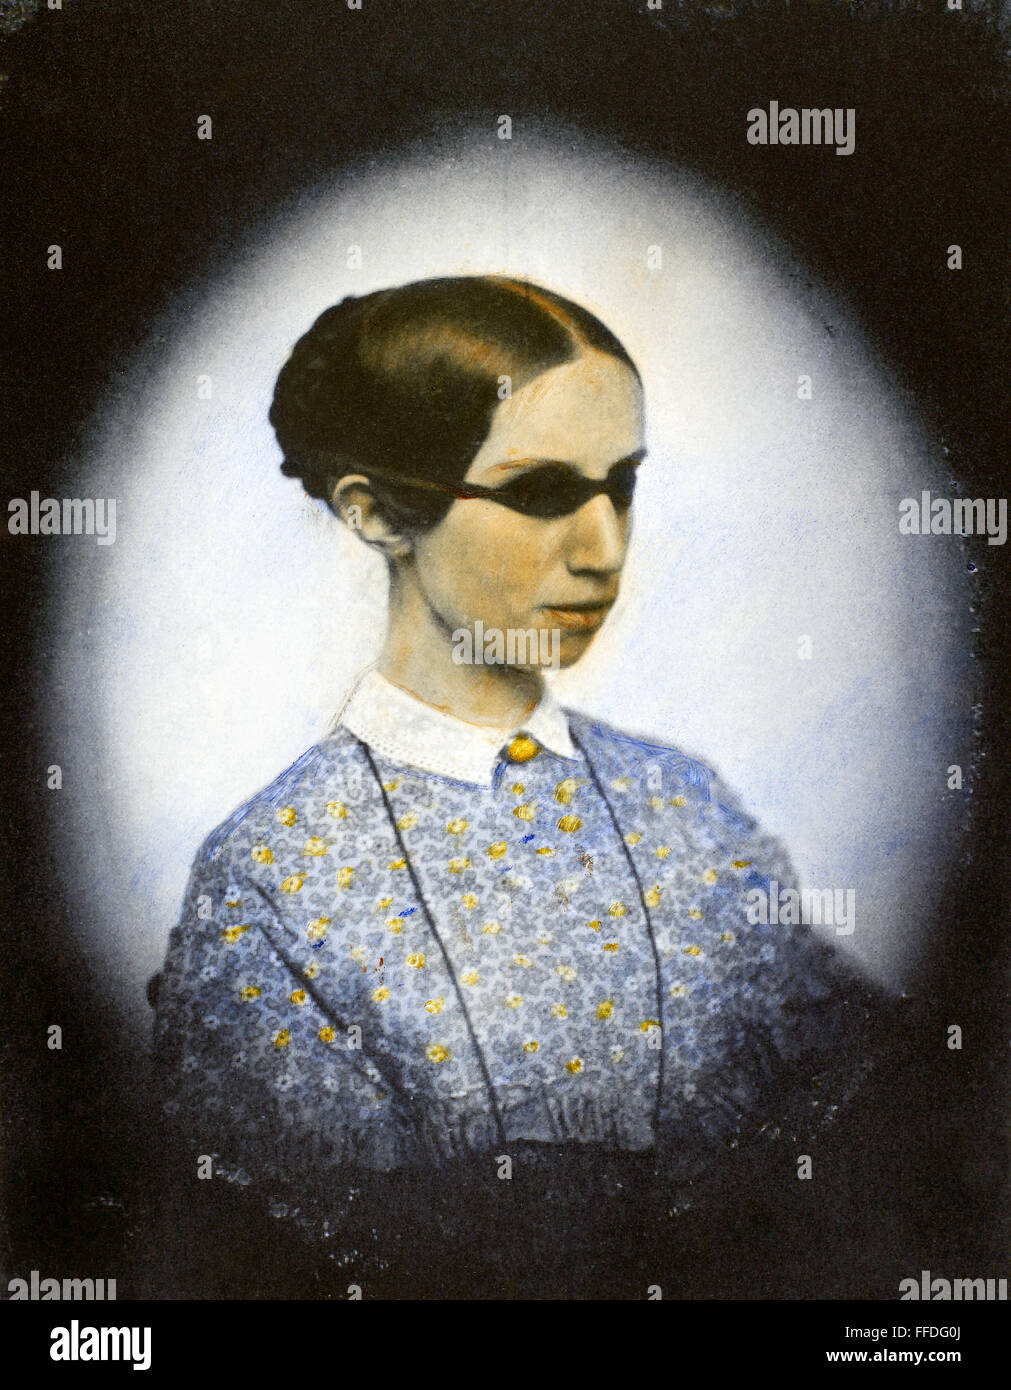 LAURA DEWEY BRIDGMAN /n(1829-1889). American blind deaf-mute, the first blind deaf-mute successfully educated by systematic means. Oil over a daguerreotype. Stock Photo